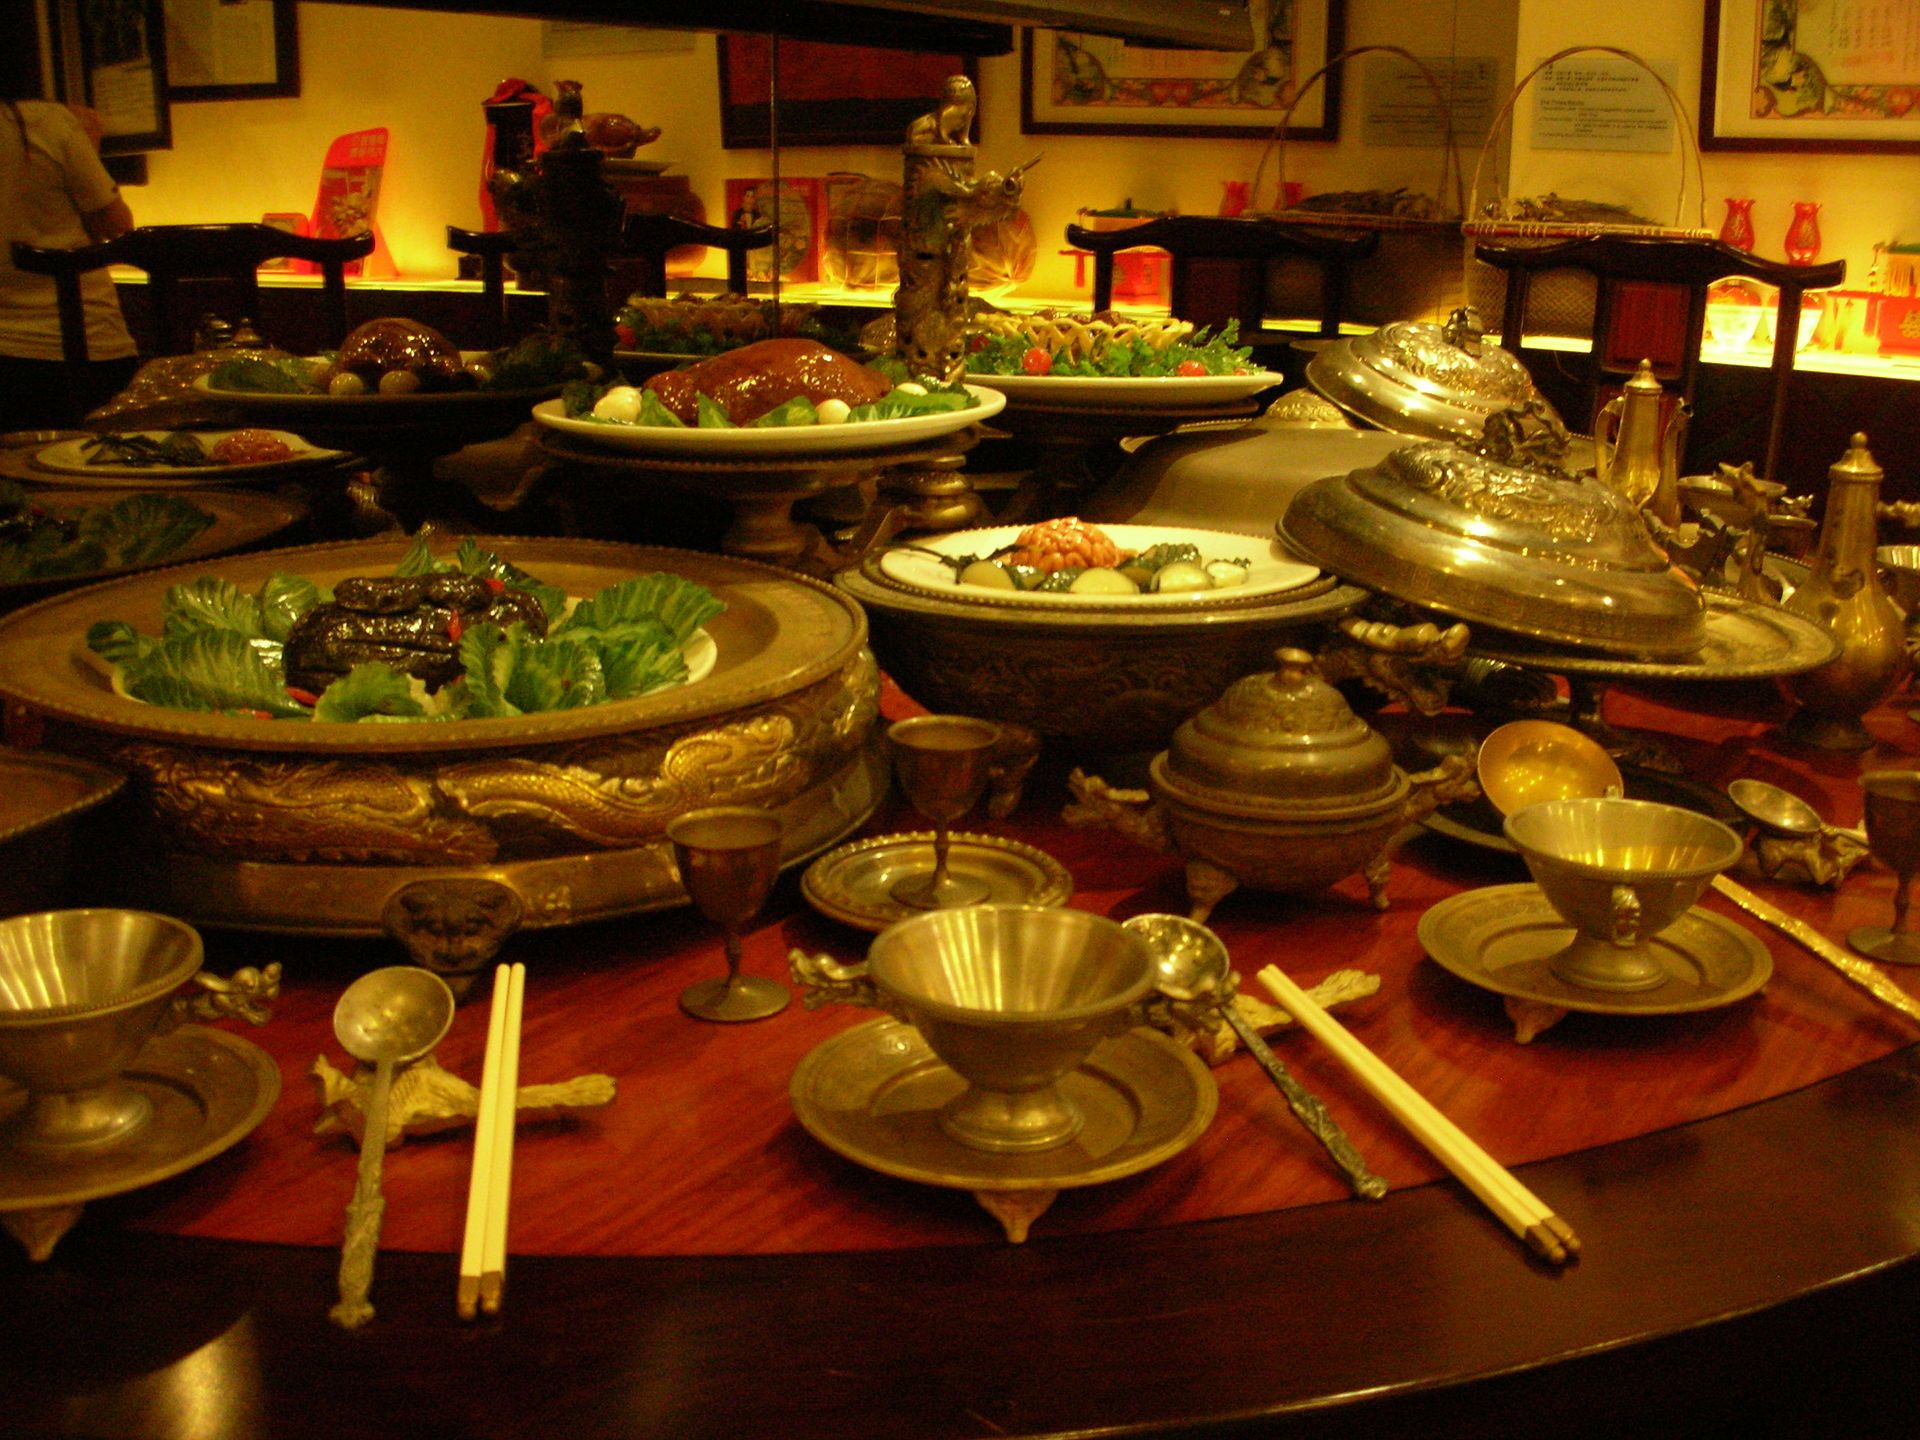 Manchu_Han_Imperial_Feast_Tao_Heung_Museum_of_Food_Culture